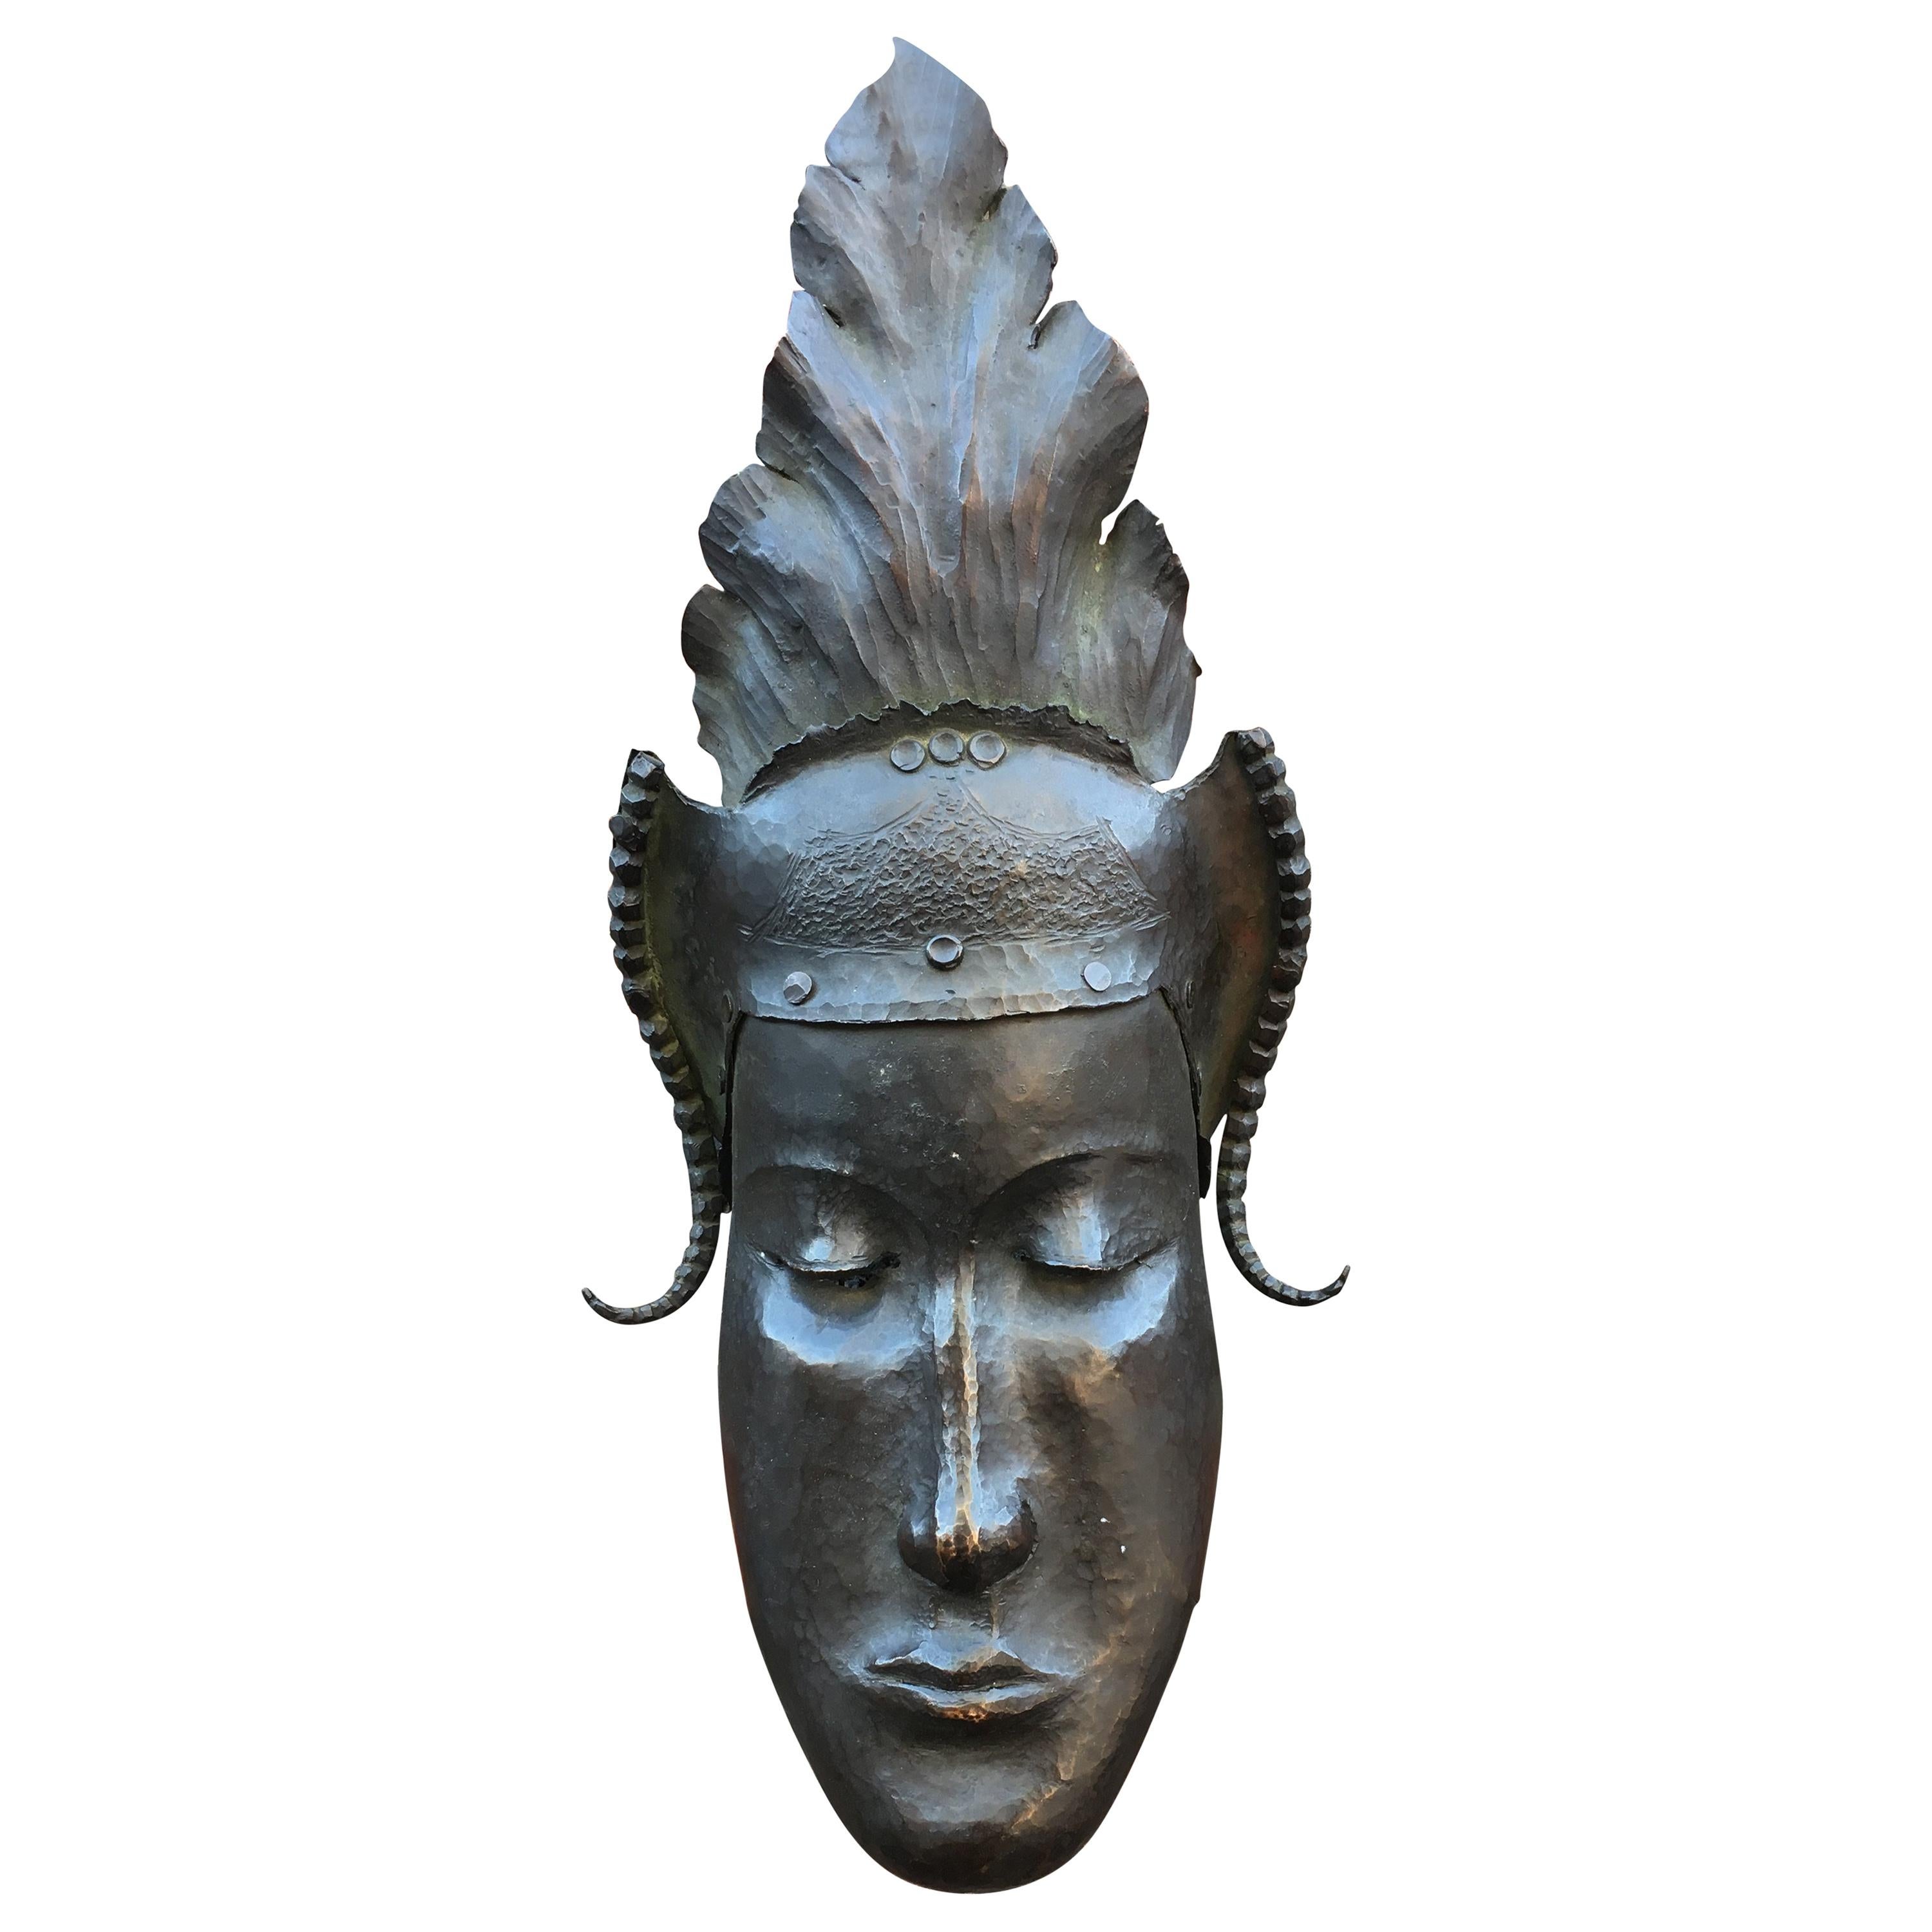 Heyndrickx, Art Deco Mask in Hammered and Patinated Bronze, Signed, Dated 1941